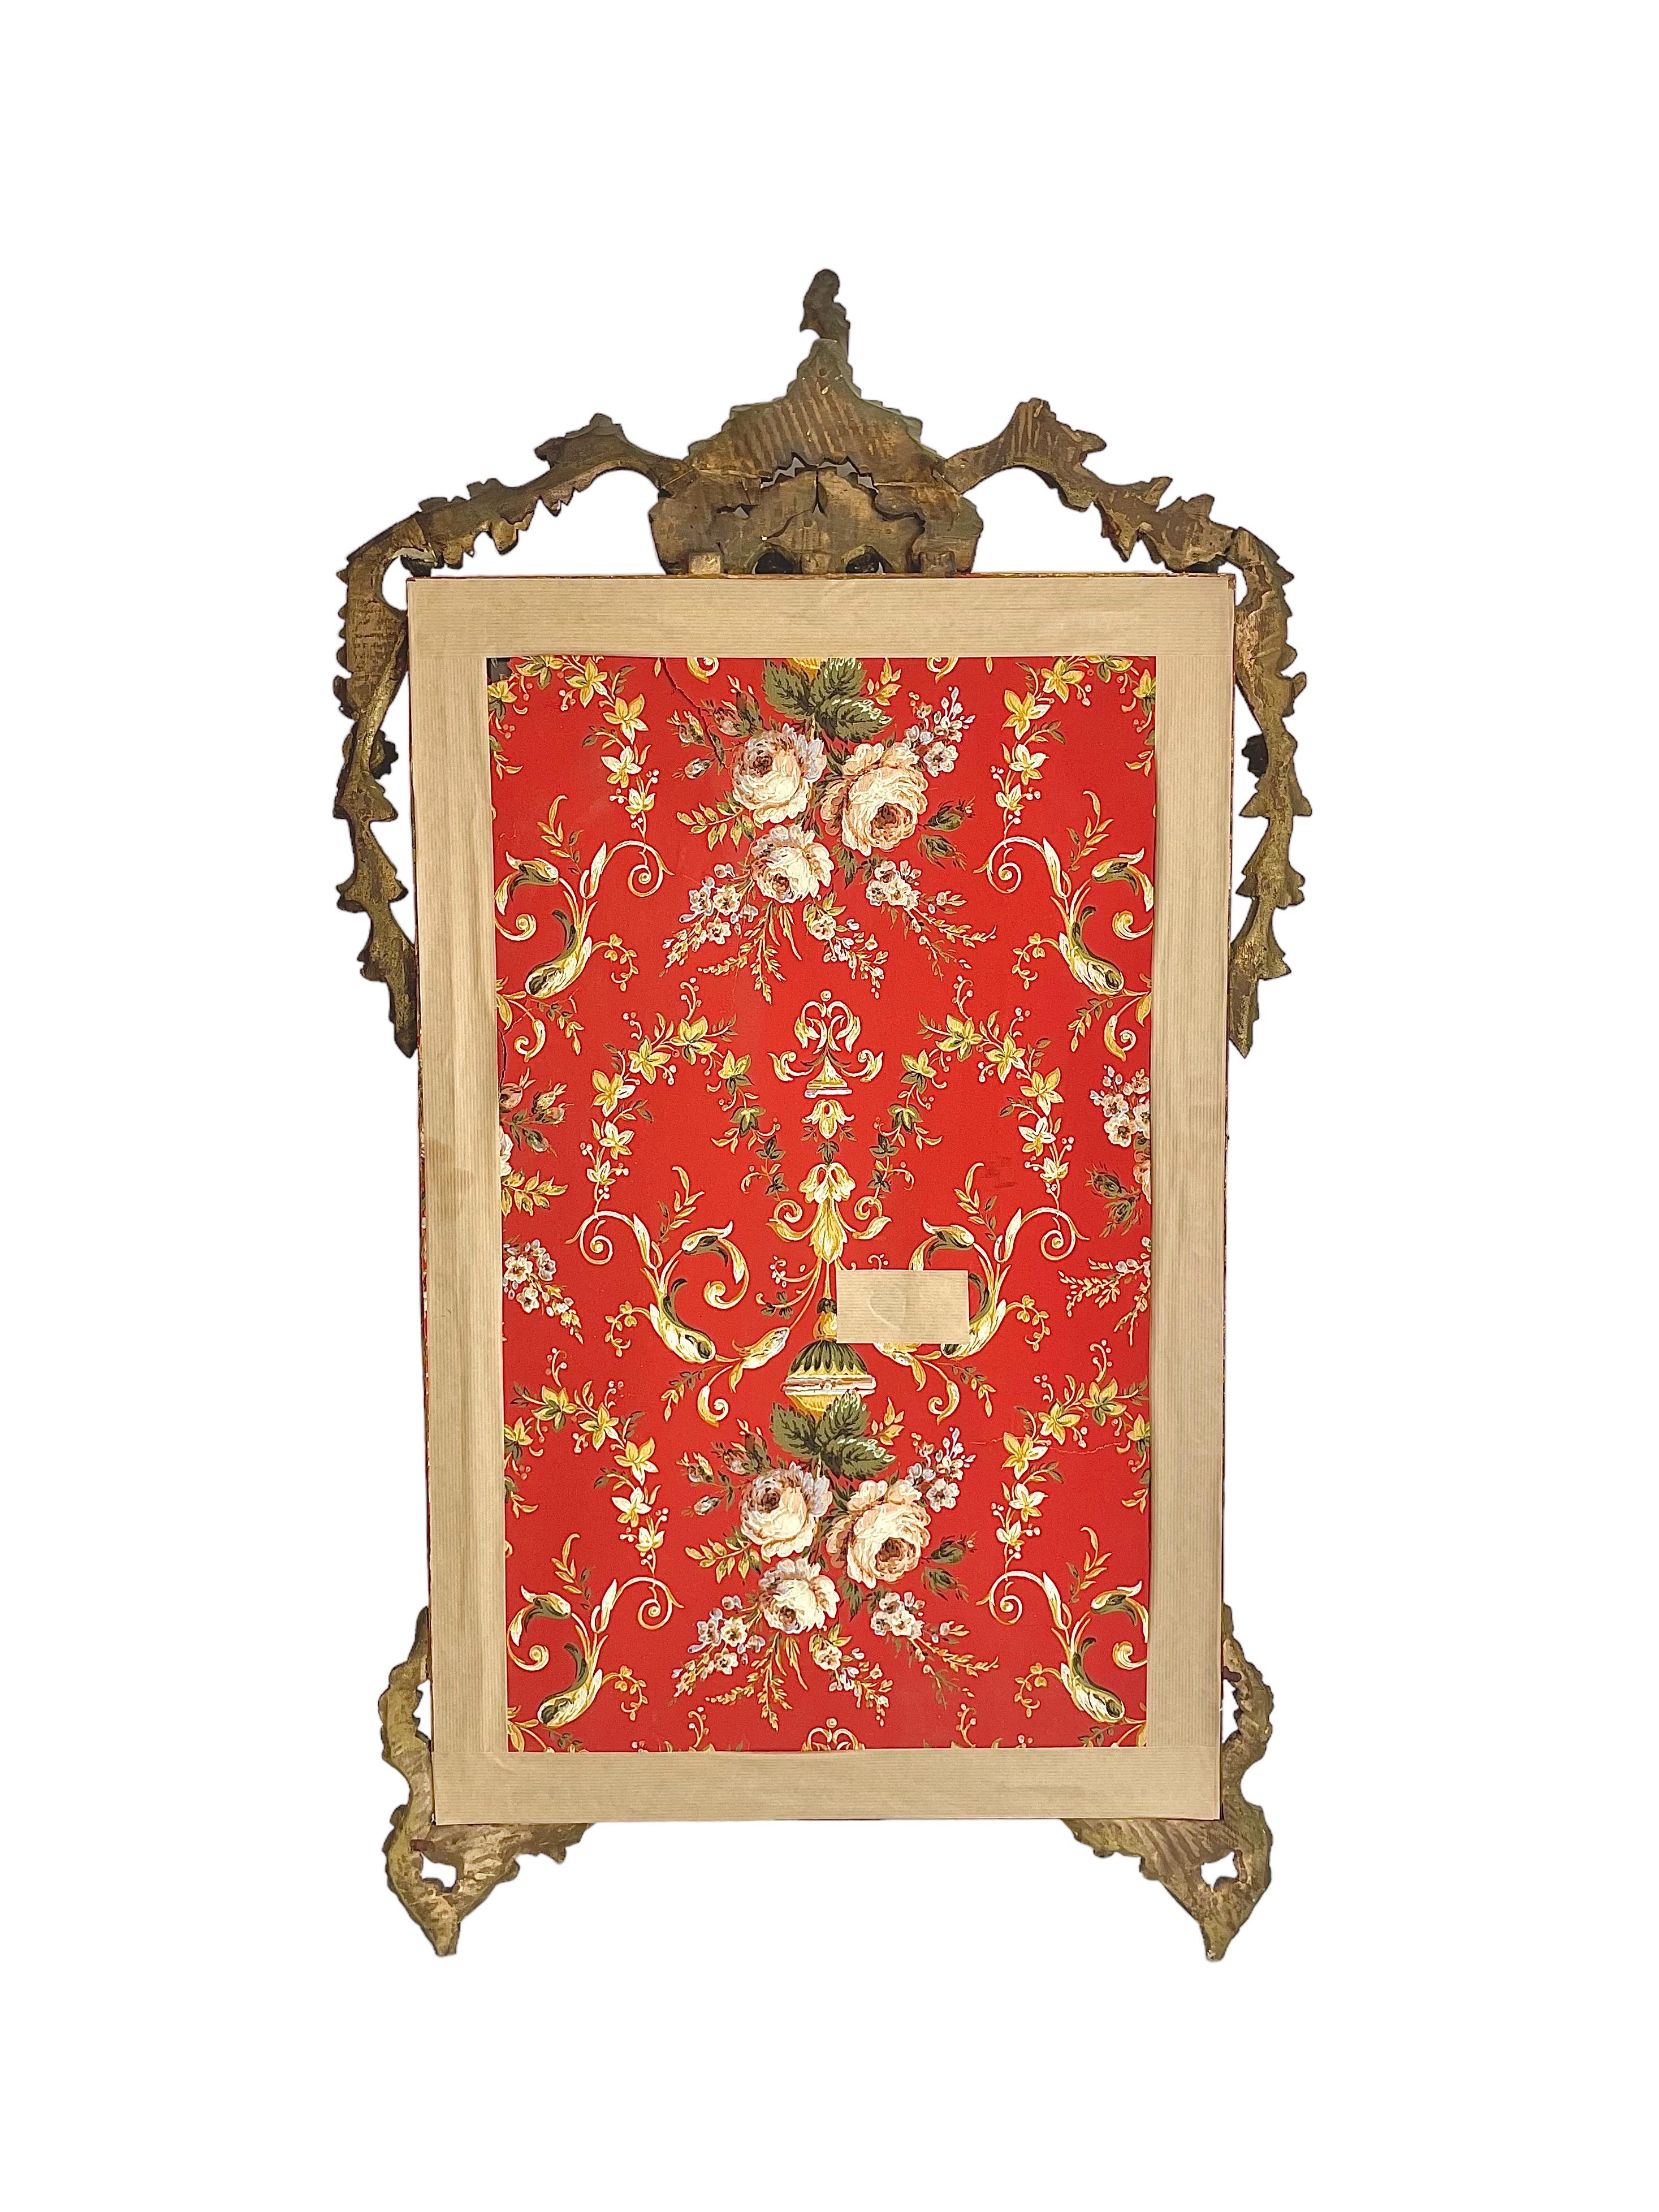 19th Century Giltwood Mantle Mirror with Ornate Crest For Sale 1